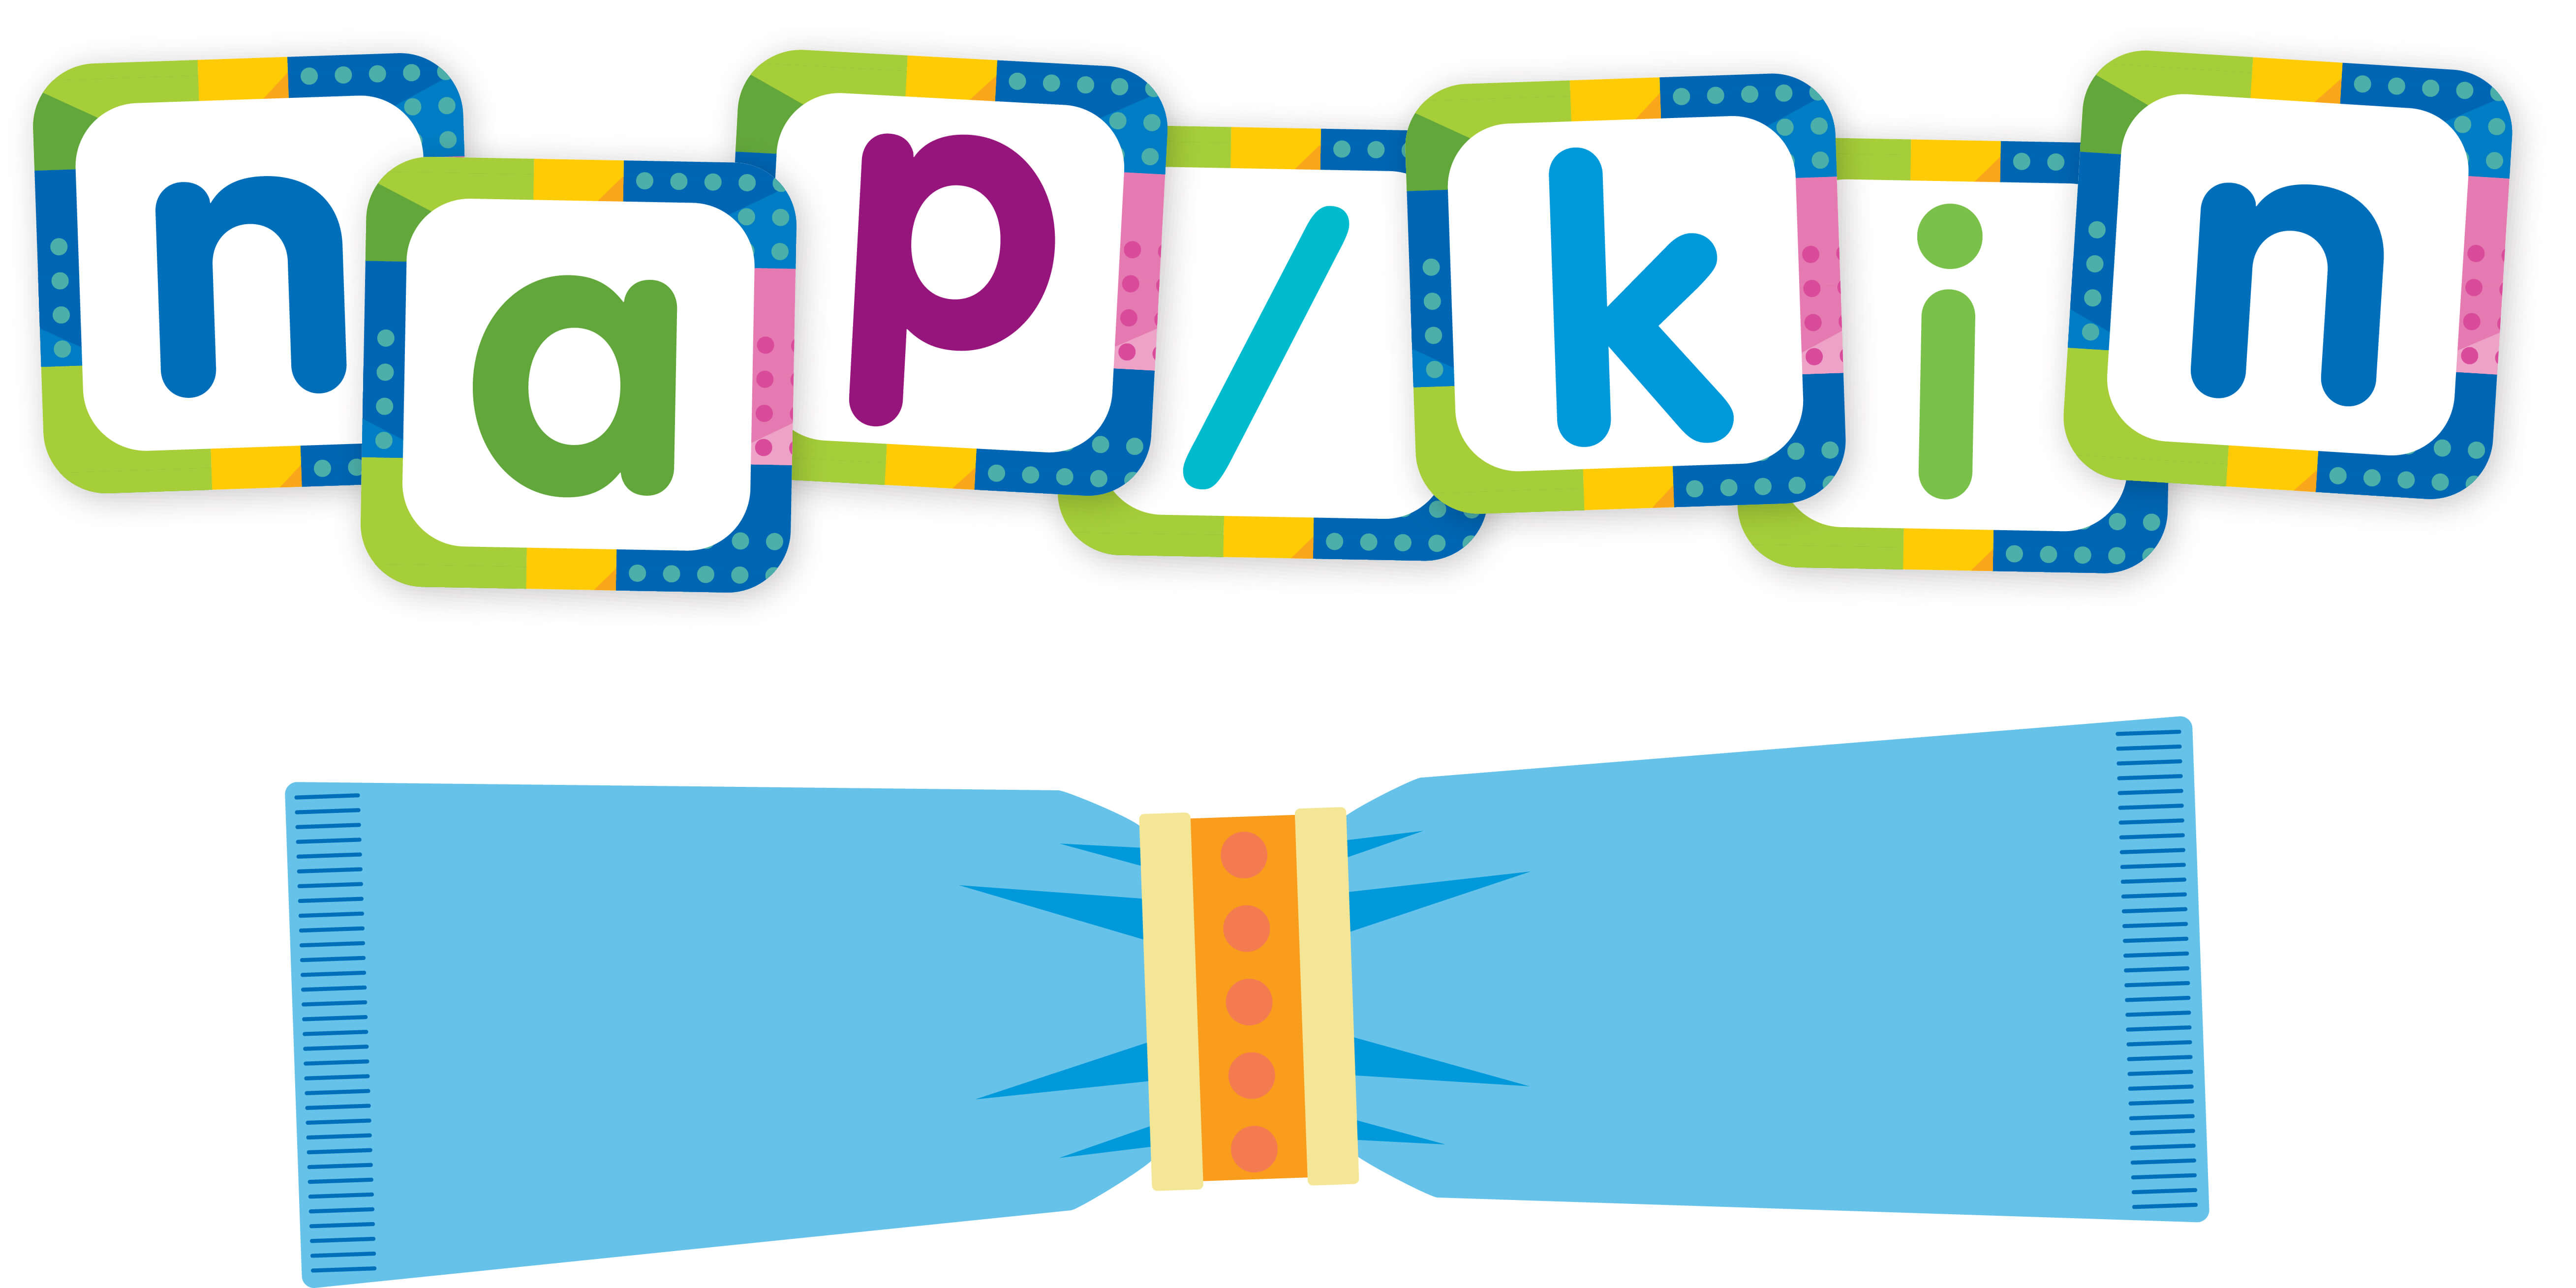 Illustration of phonics letter-cards forming the word napkin, with a slash mark designating the two syllables.